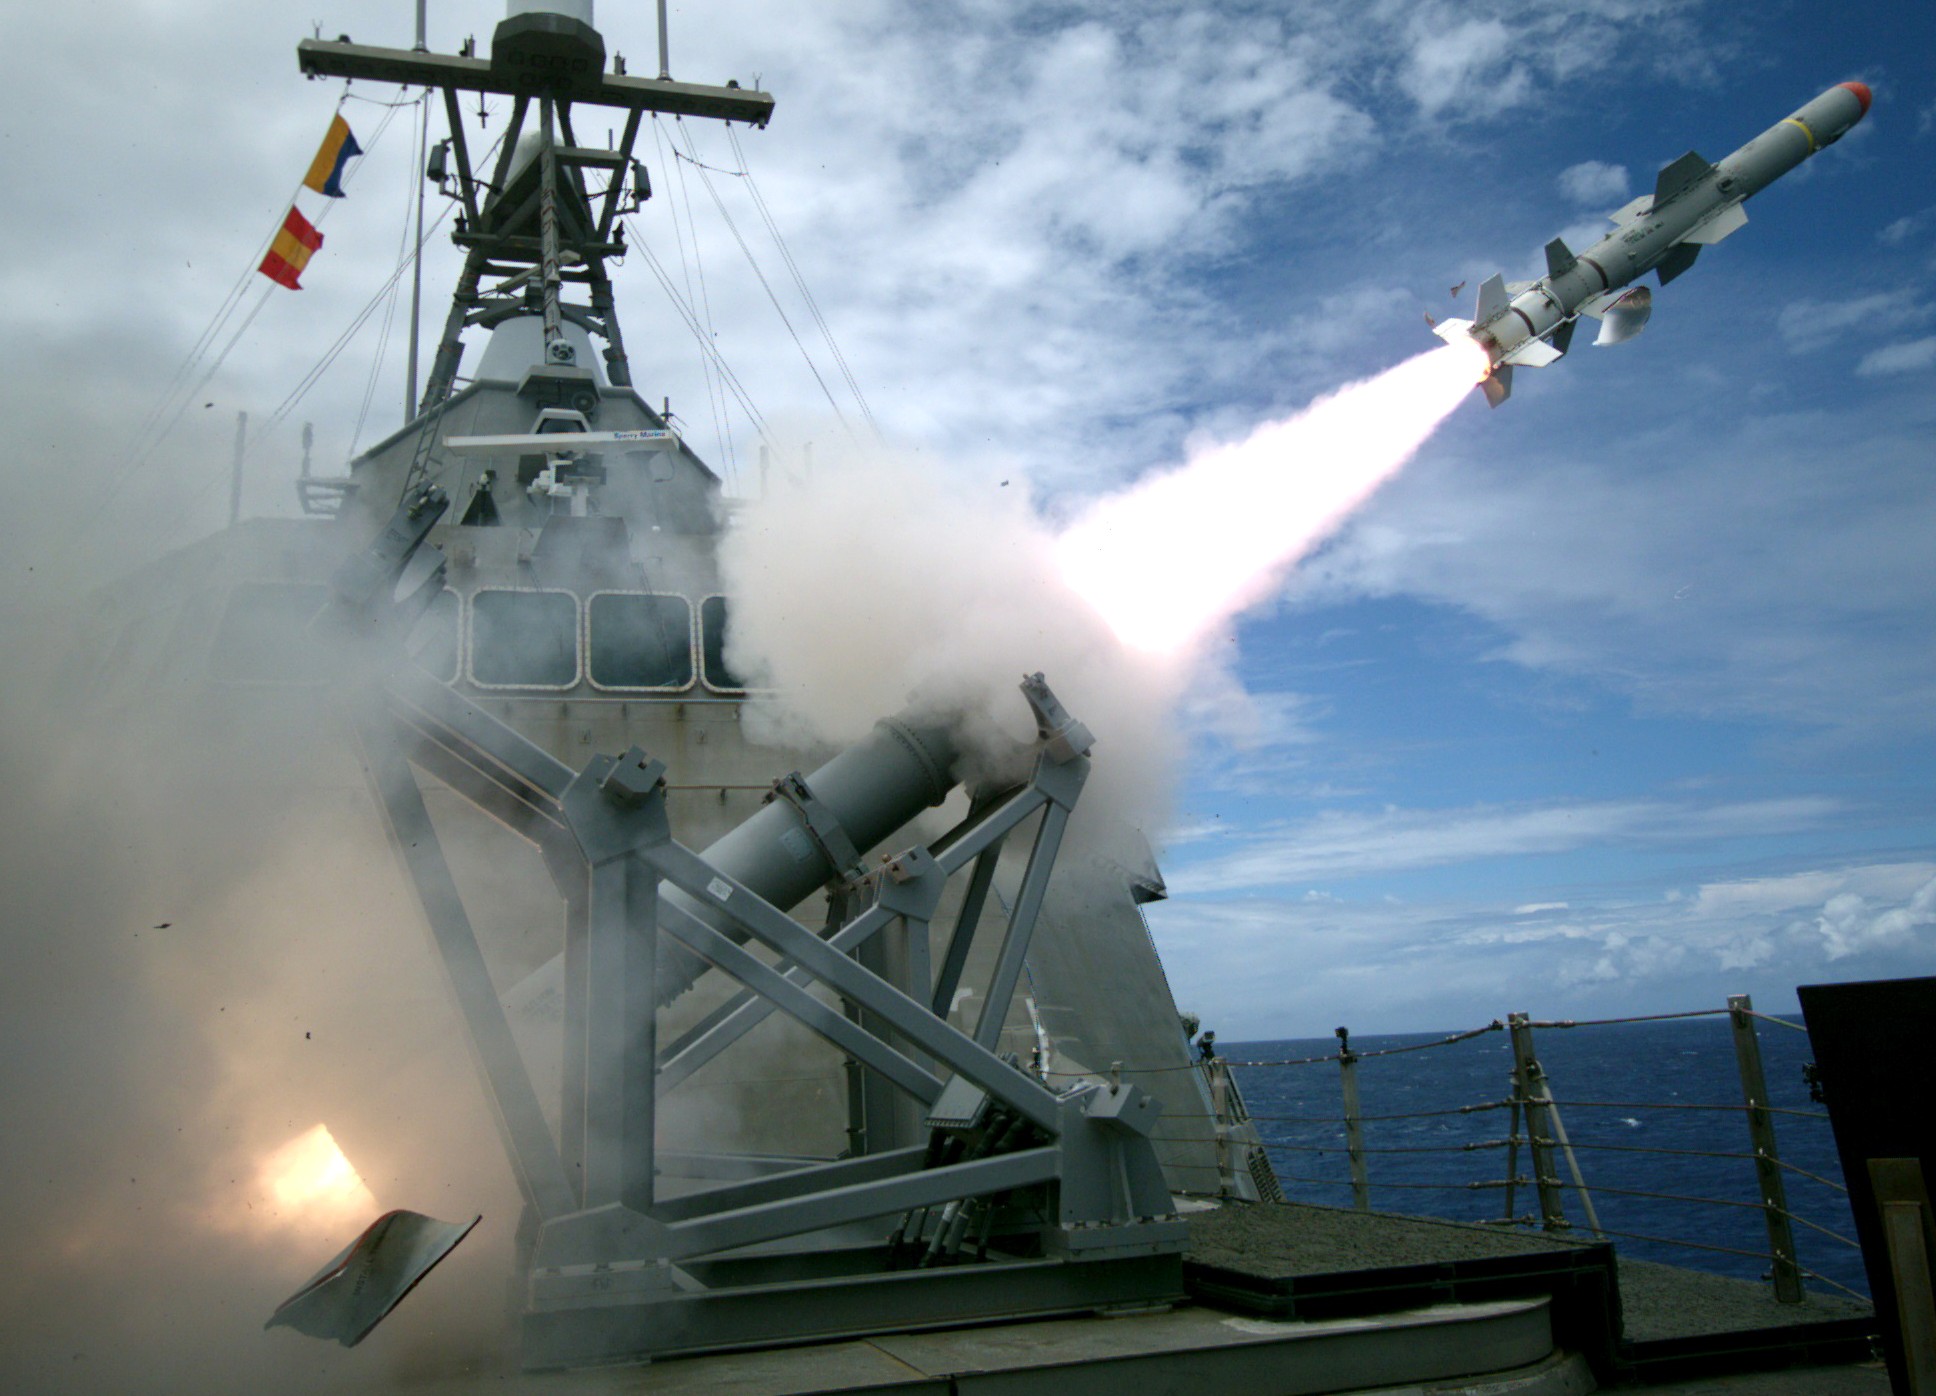 rgm-84 harpoon ssm mk-141 missile launcher independence class littoral combat ship lcs 49